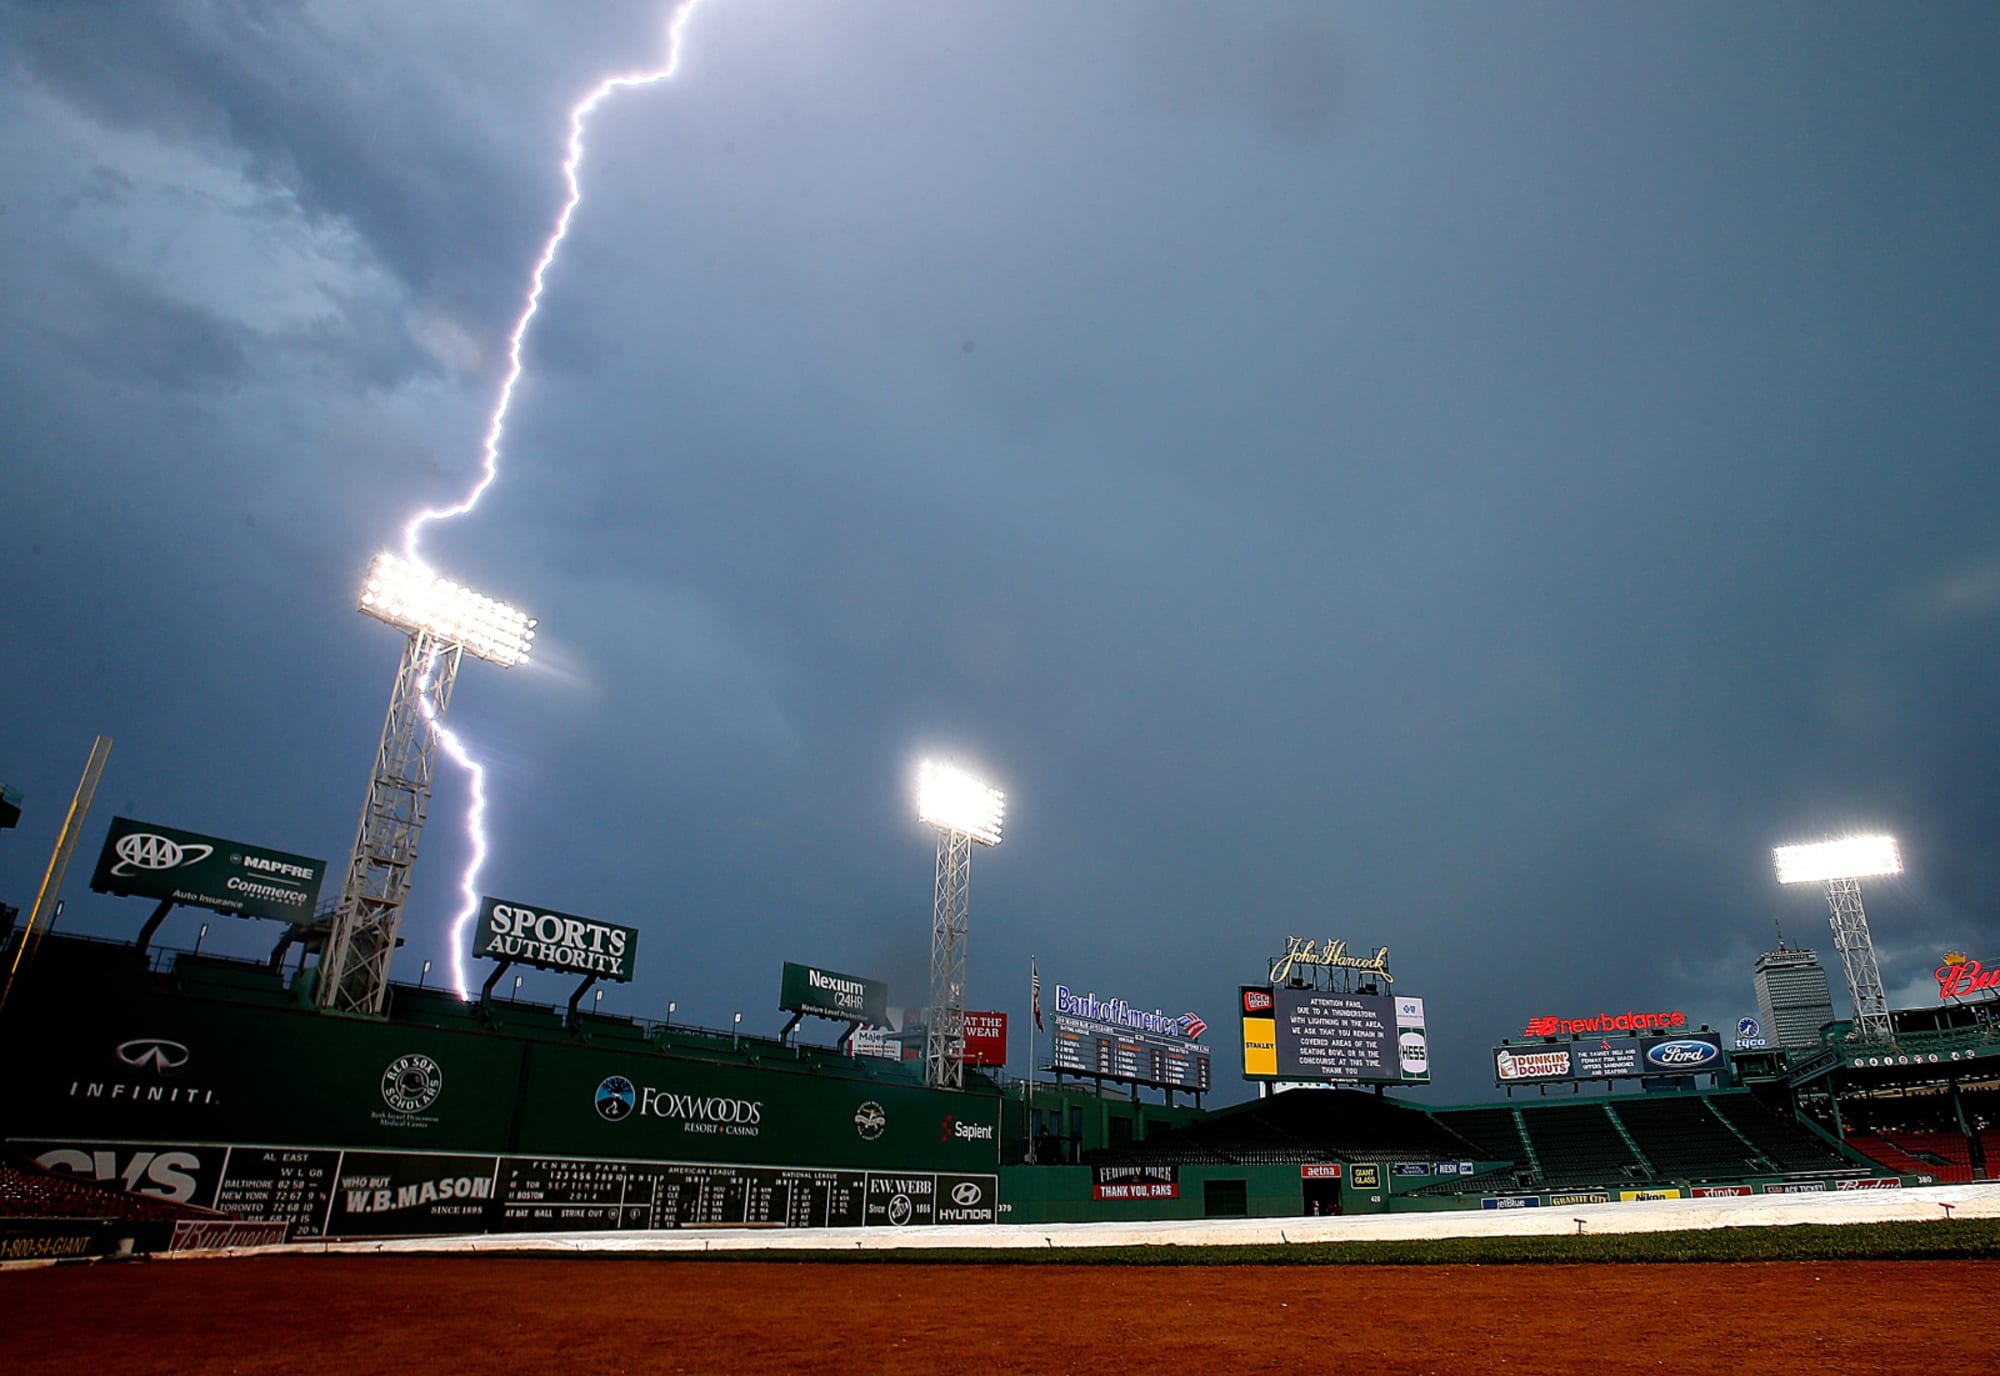 Minor League player struck by lightning 70 years ago today